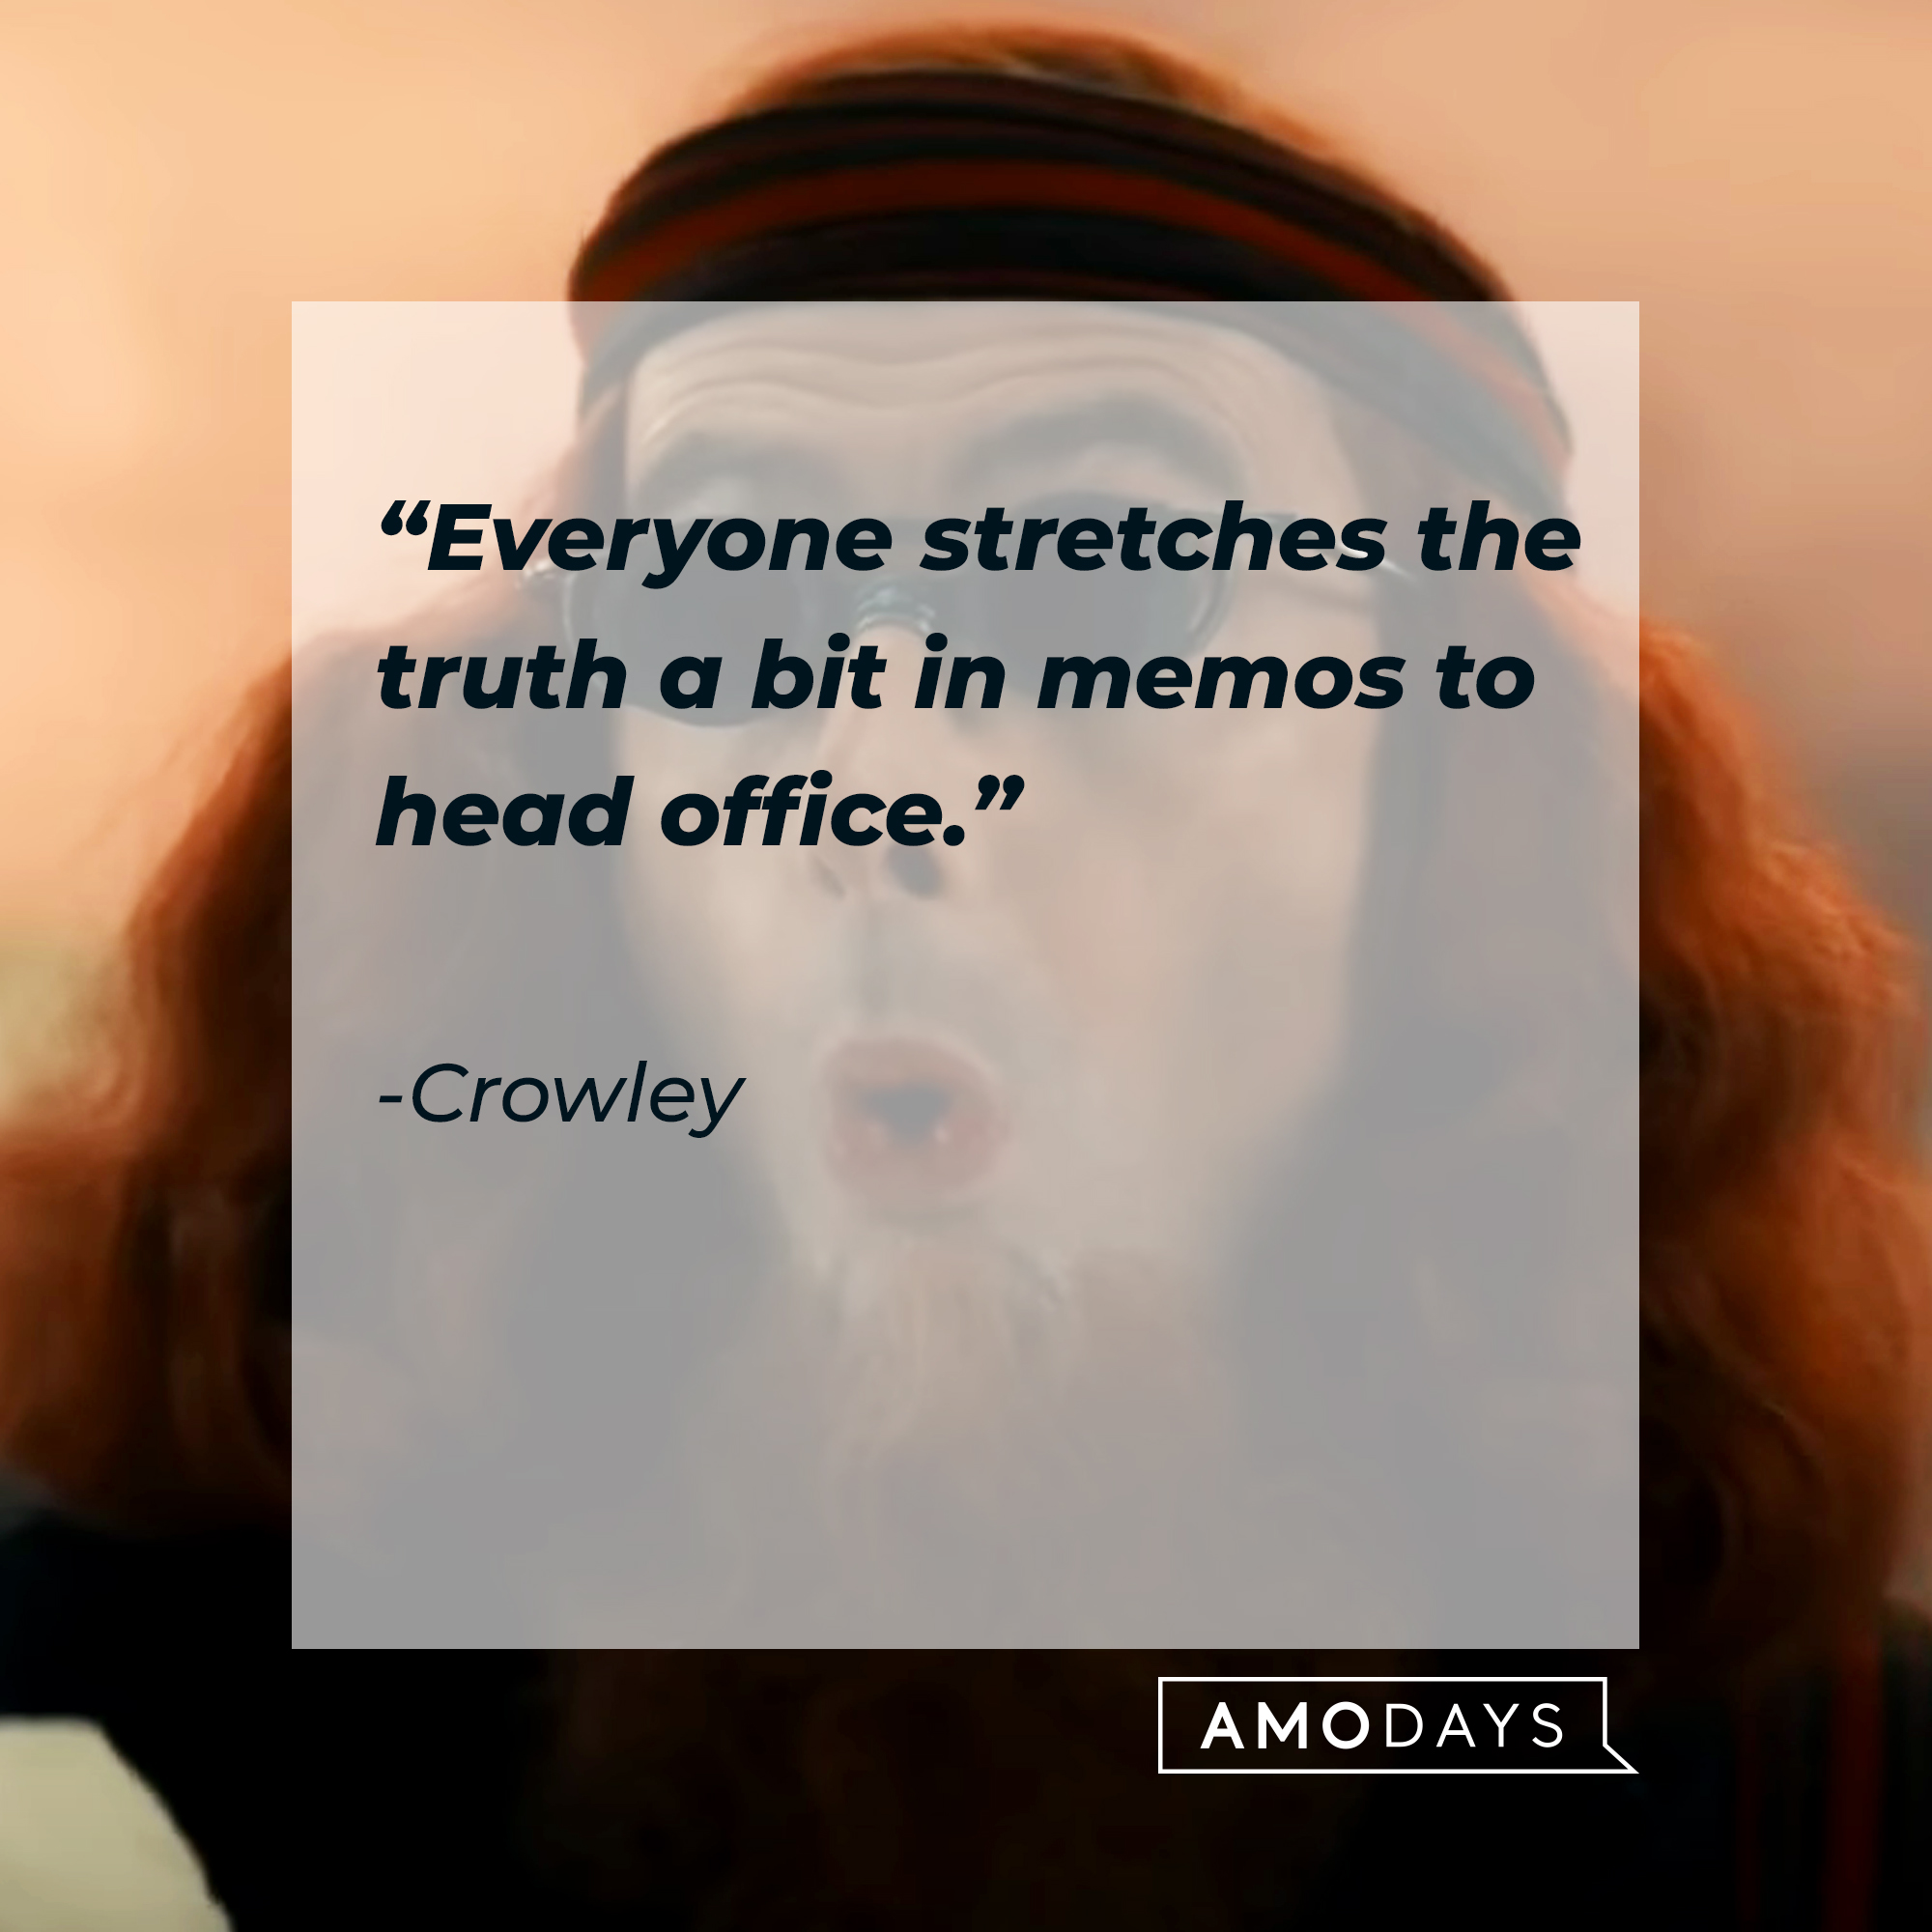 Crowley's quote: "Everyone stretches the truth a bit in memos to head office." | Source: Facebook.com/goodomensprime